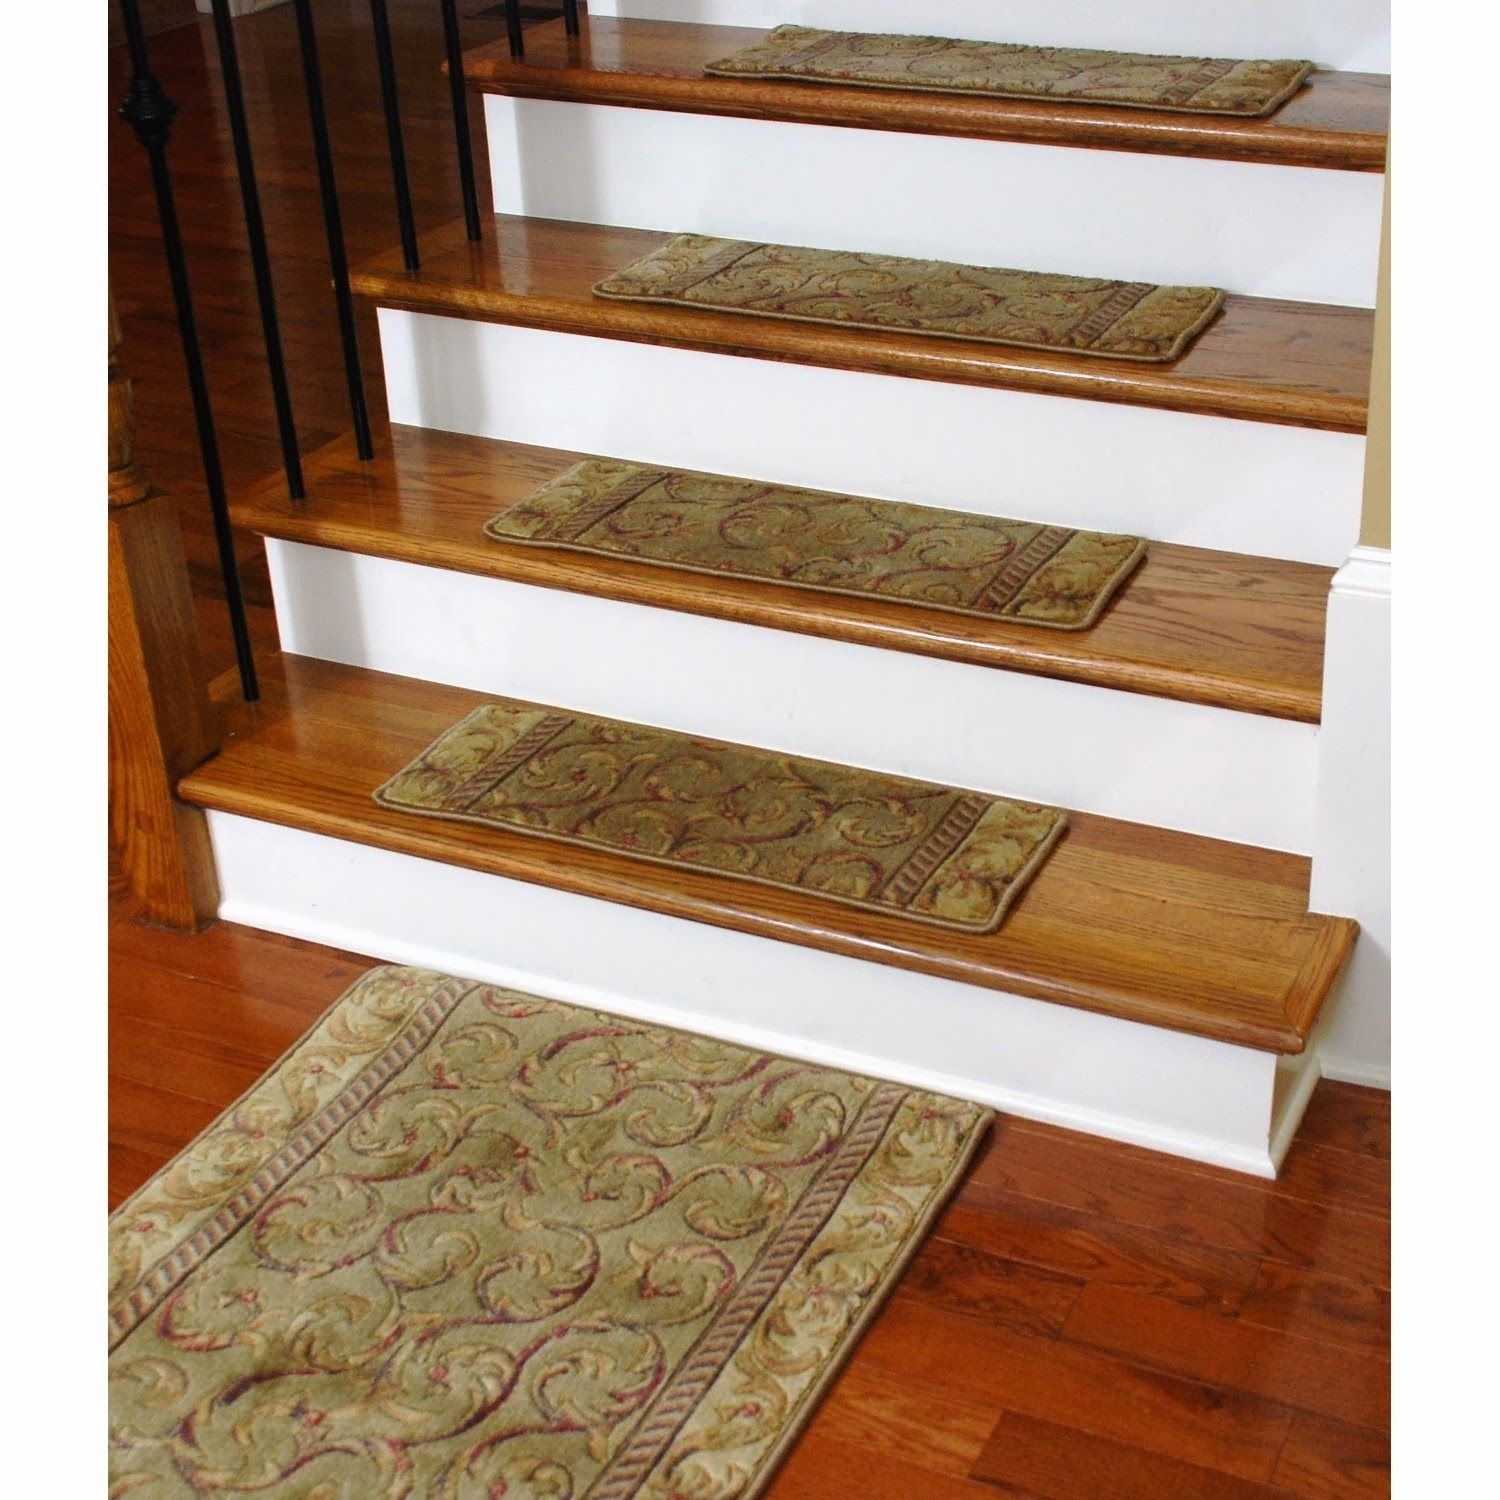 40 Carpet Treads For Stairs Uk Ucc Woven Stair Carpet Lifestyle Within Stair Protectors Wooden Stairs (View 11 of 20)